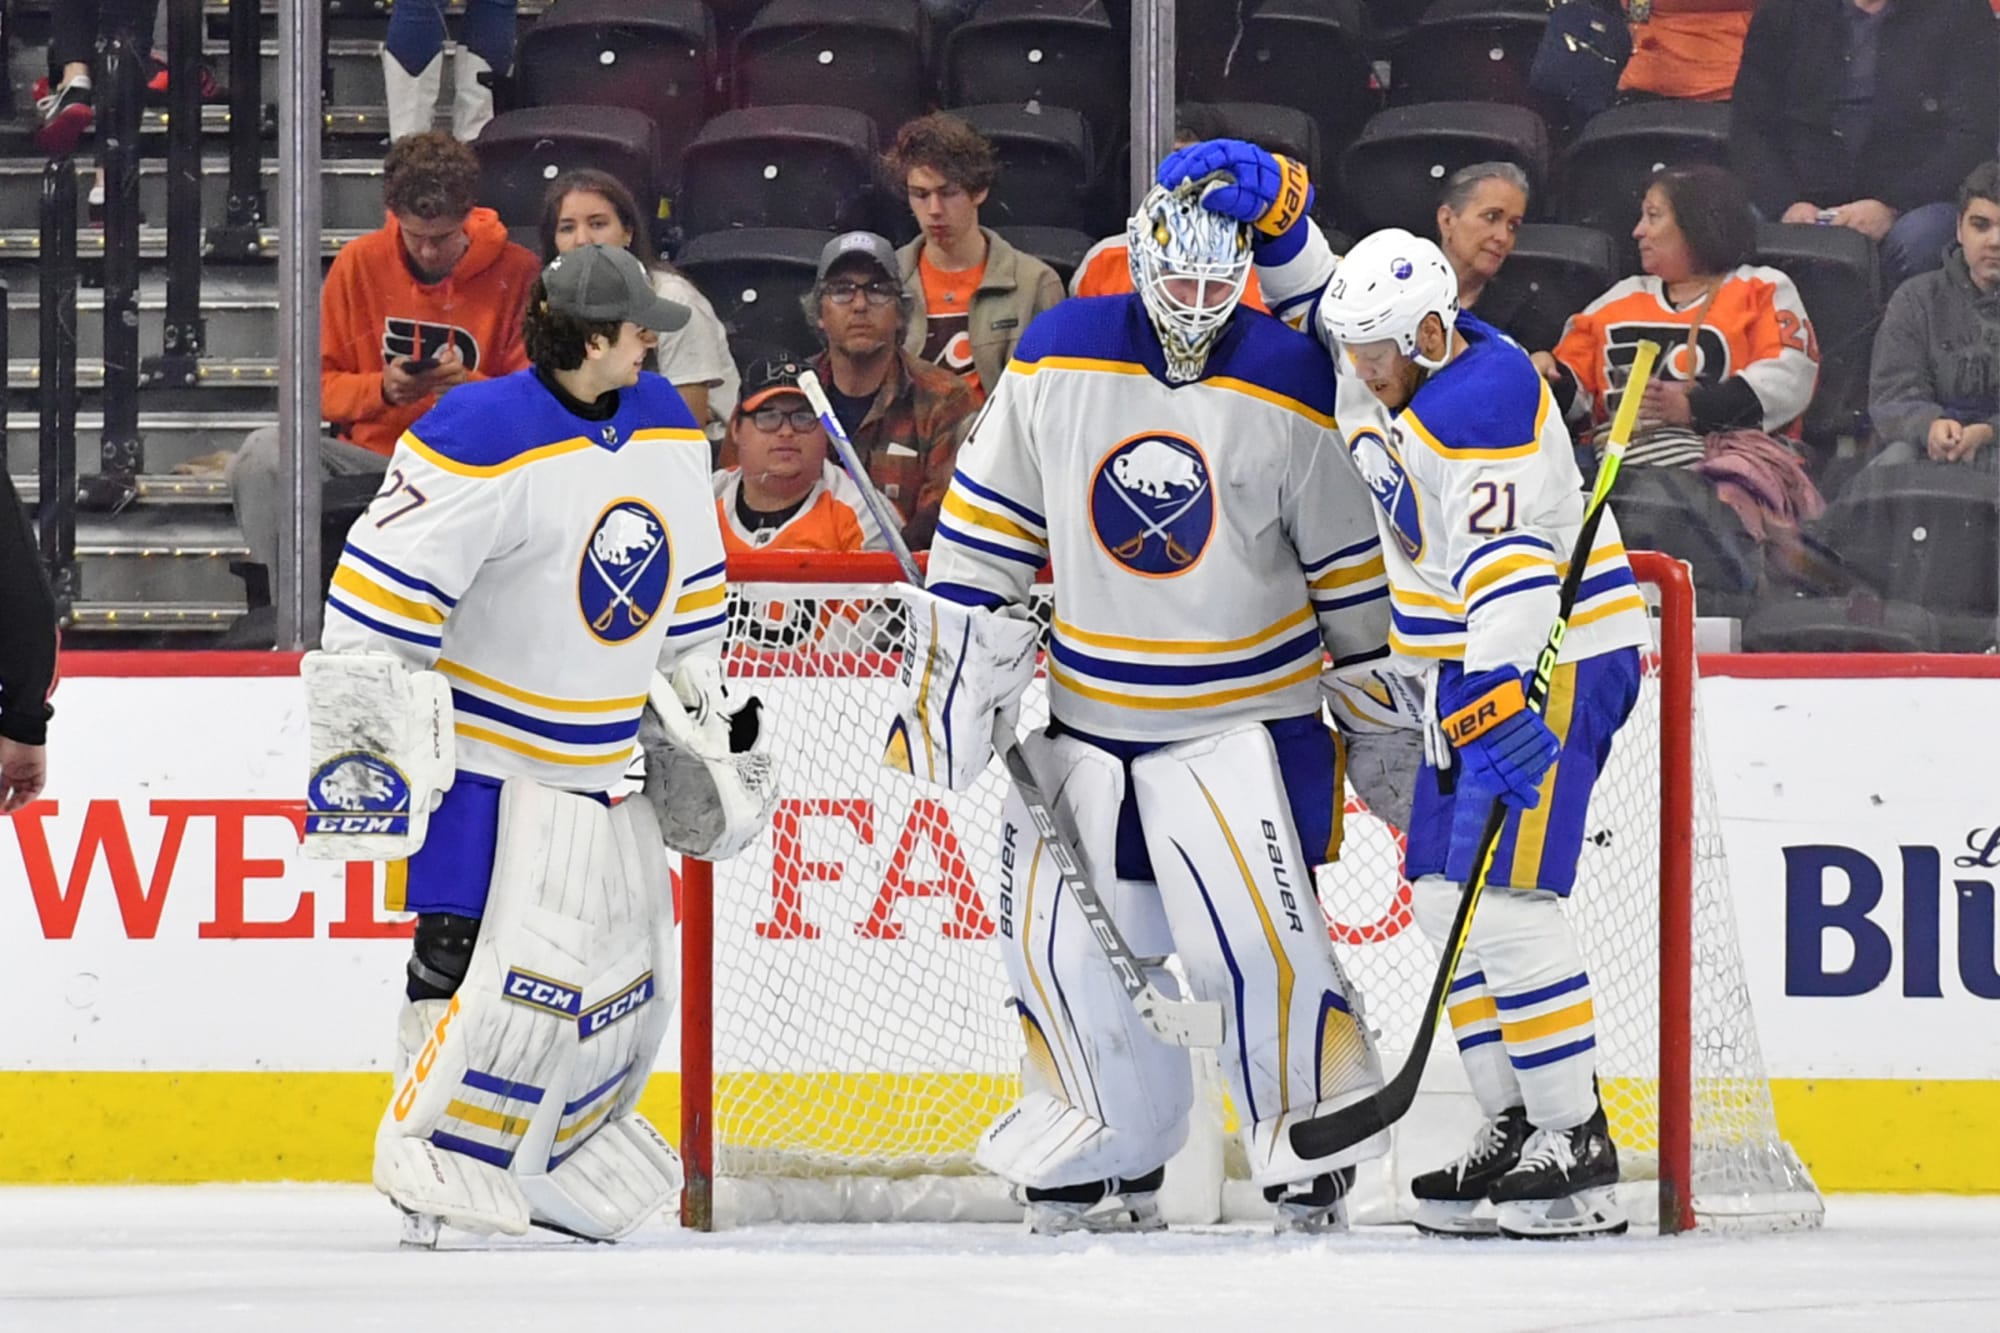 Mike Harrington: Even as they struggle, Sabres finding the way to